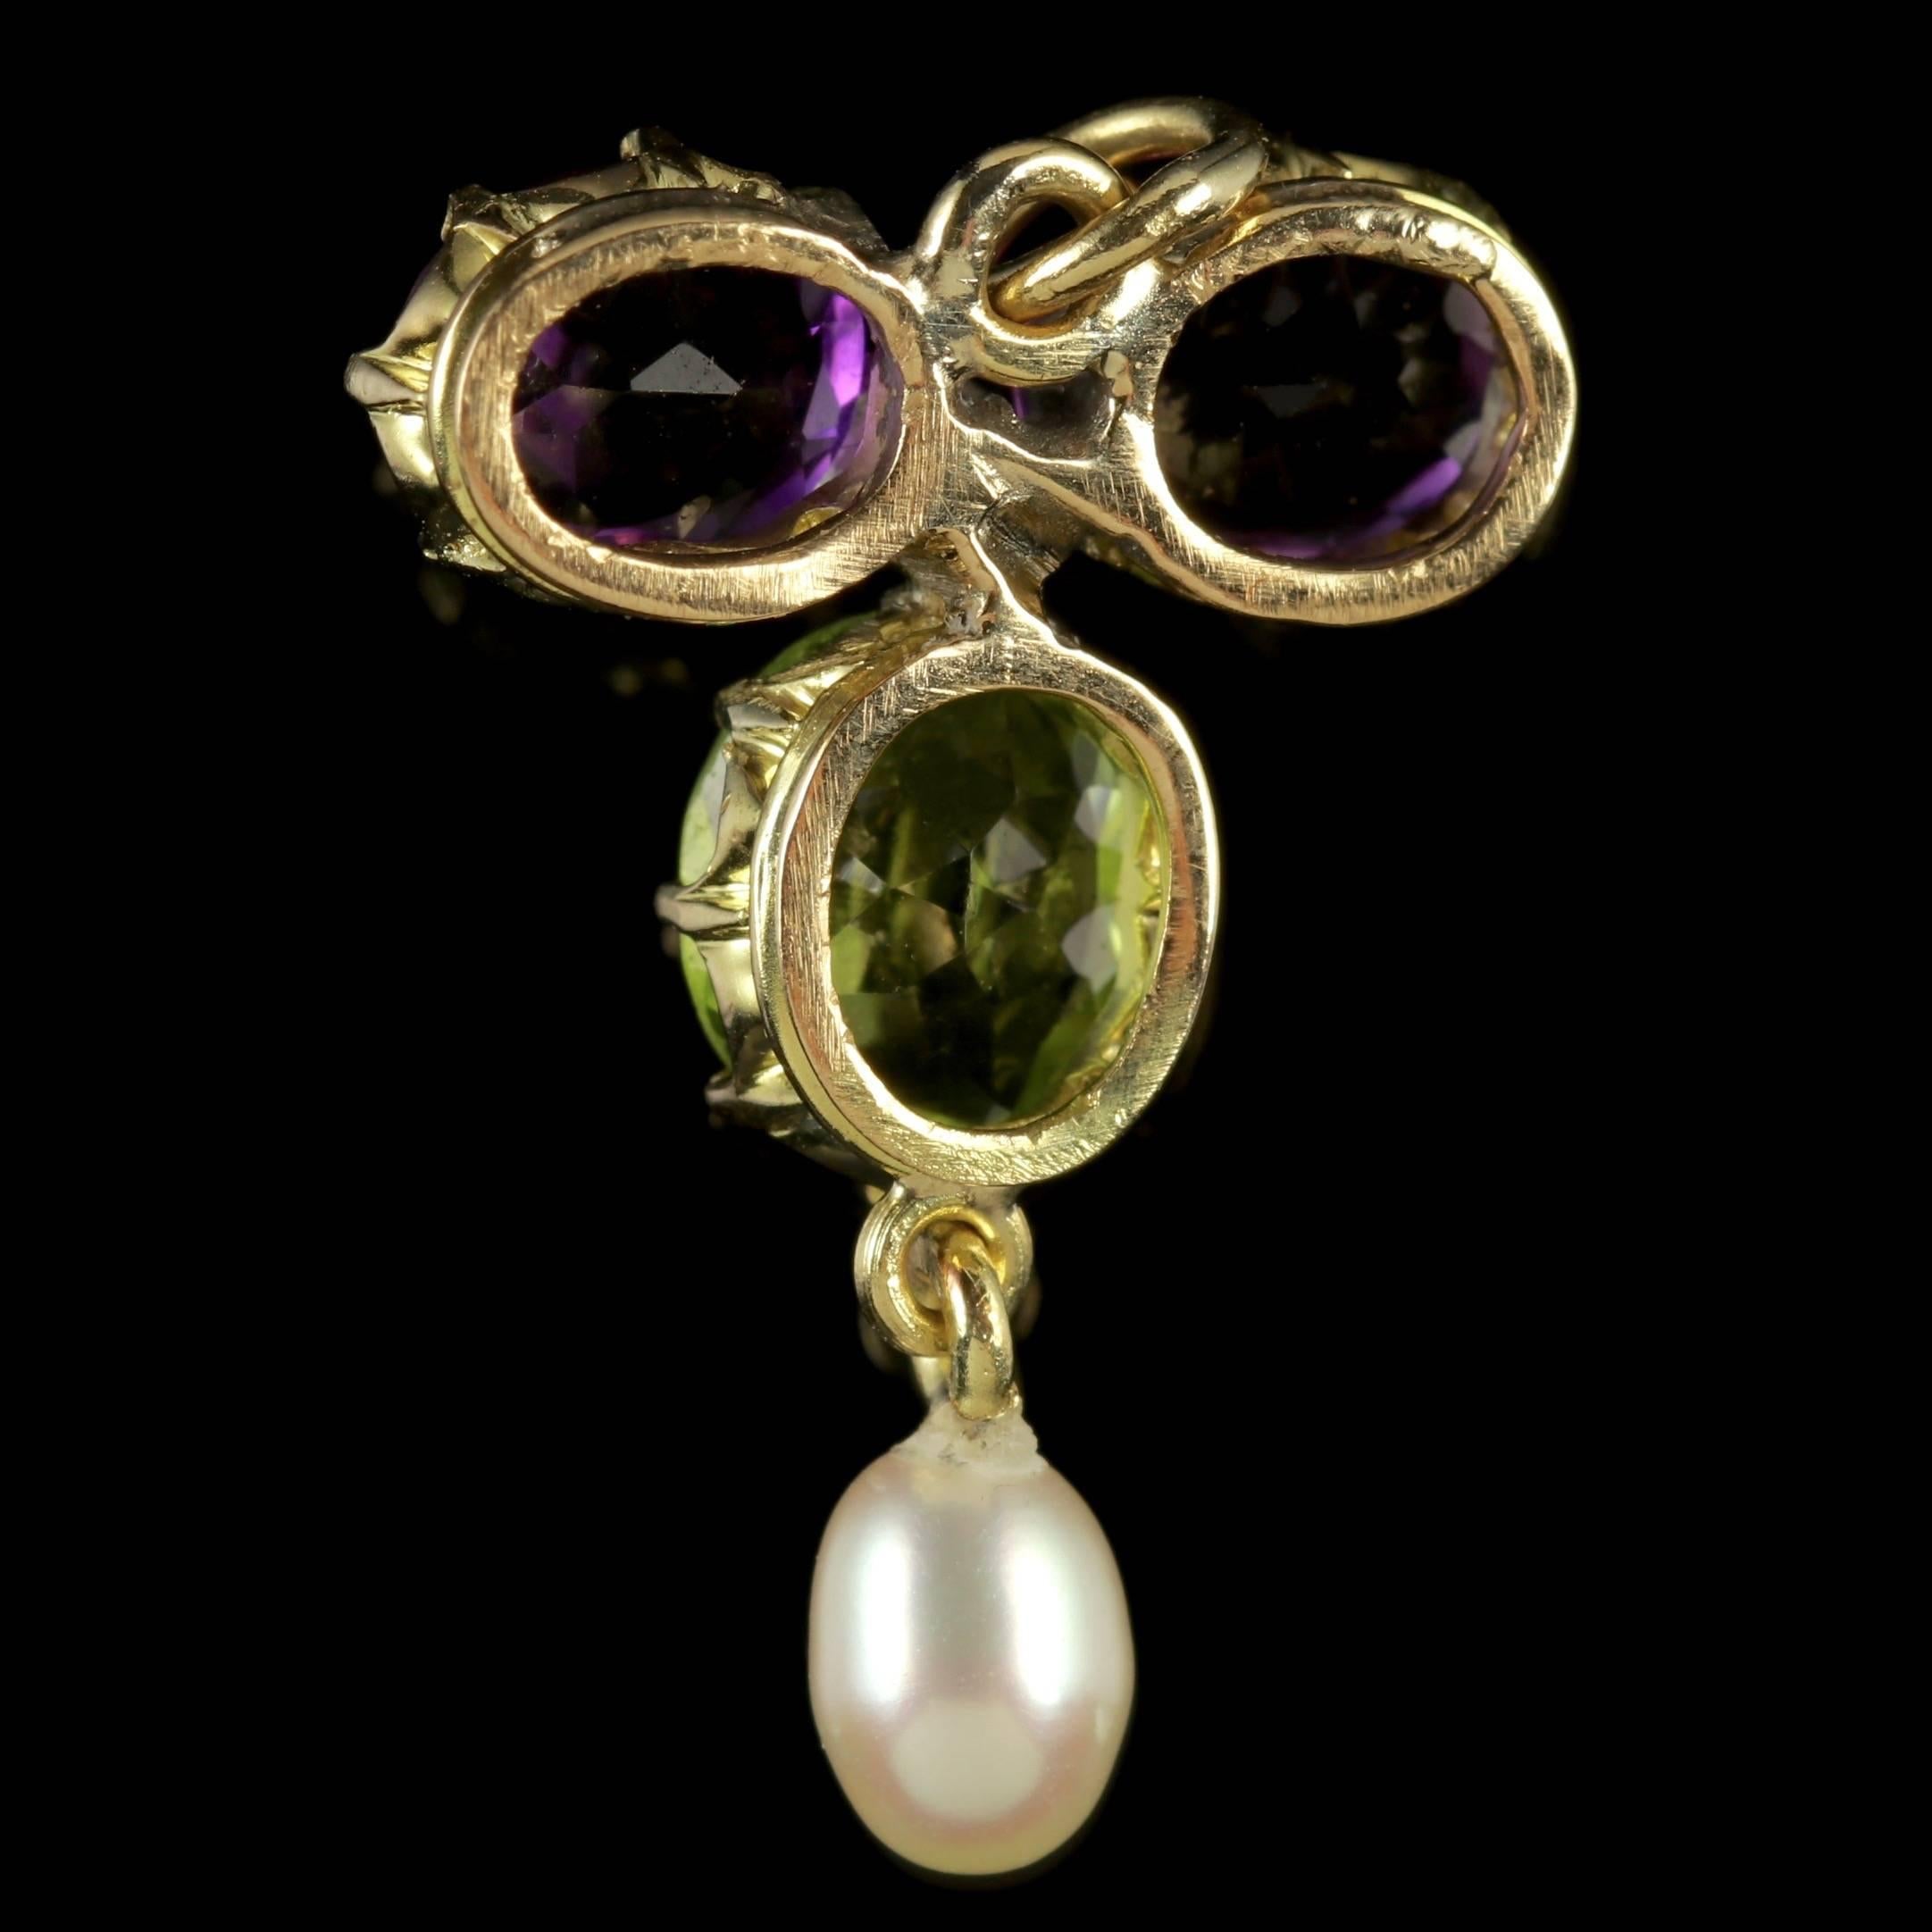 To read more please click continue reading below-

This fabulous little antique Victorian 15ct Yellow Gold pendant is a genuine Suffragette piece, Circa 1900. 

Emmeline Pankhurst was the leader of the British Suffragette movement in the 19th